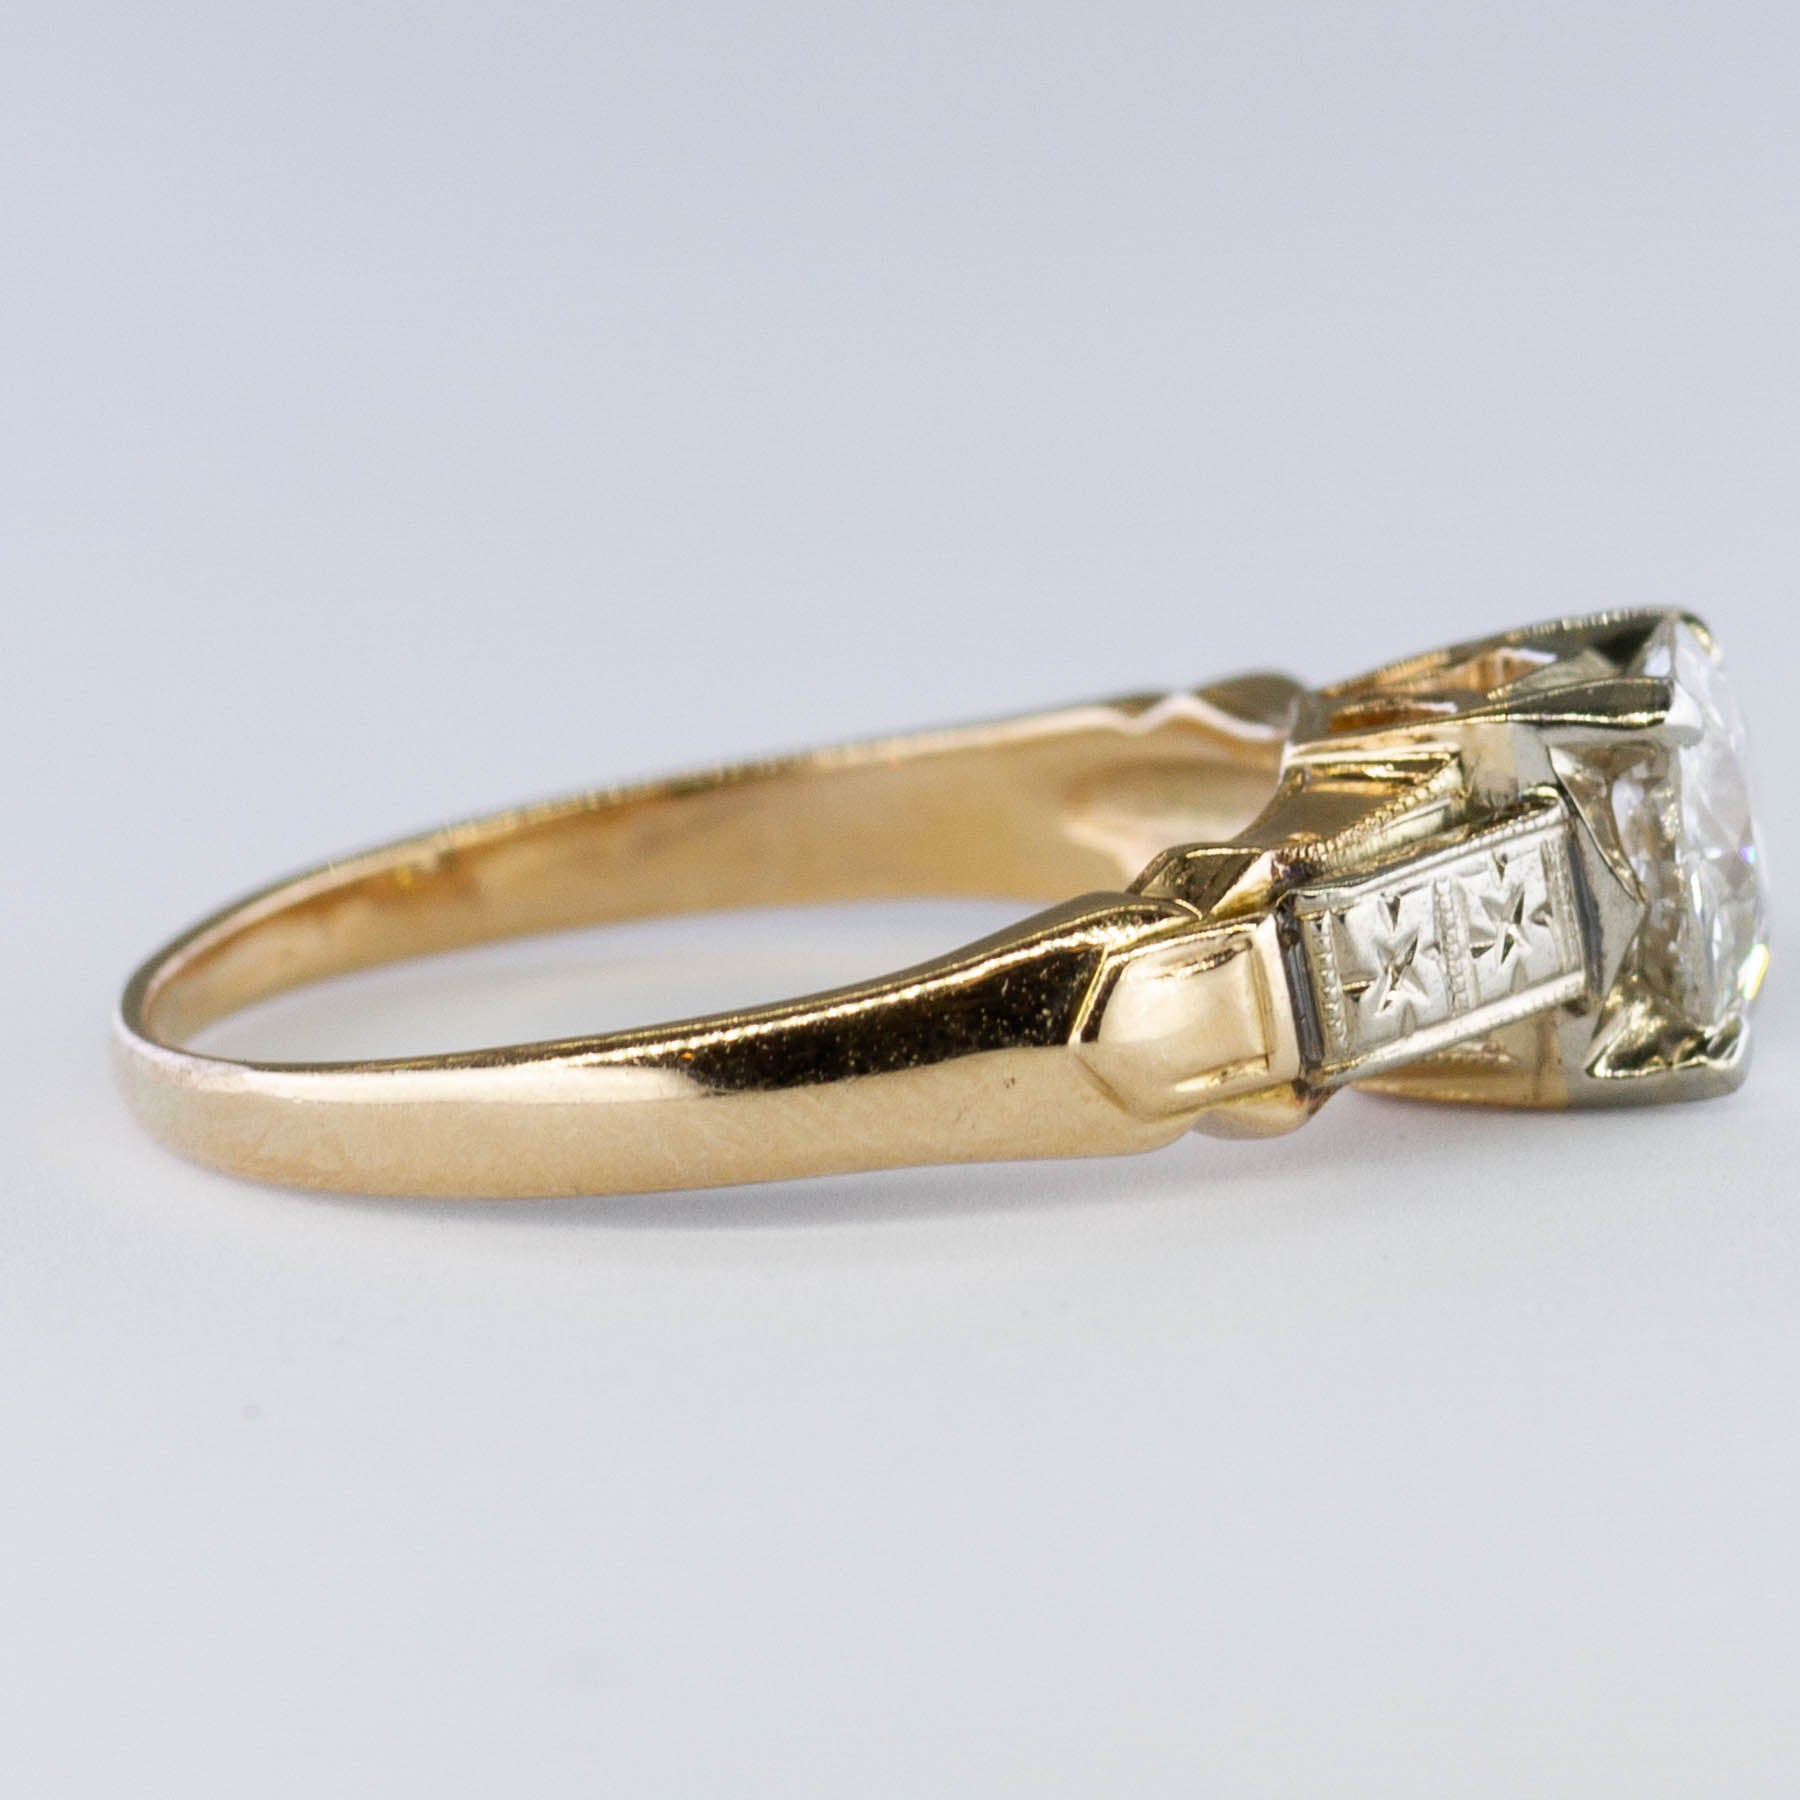 Early 1900s Old European Cut Diamond Engagement Ring | 0.81ct | SZ 4.75 |